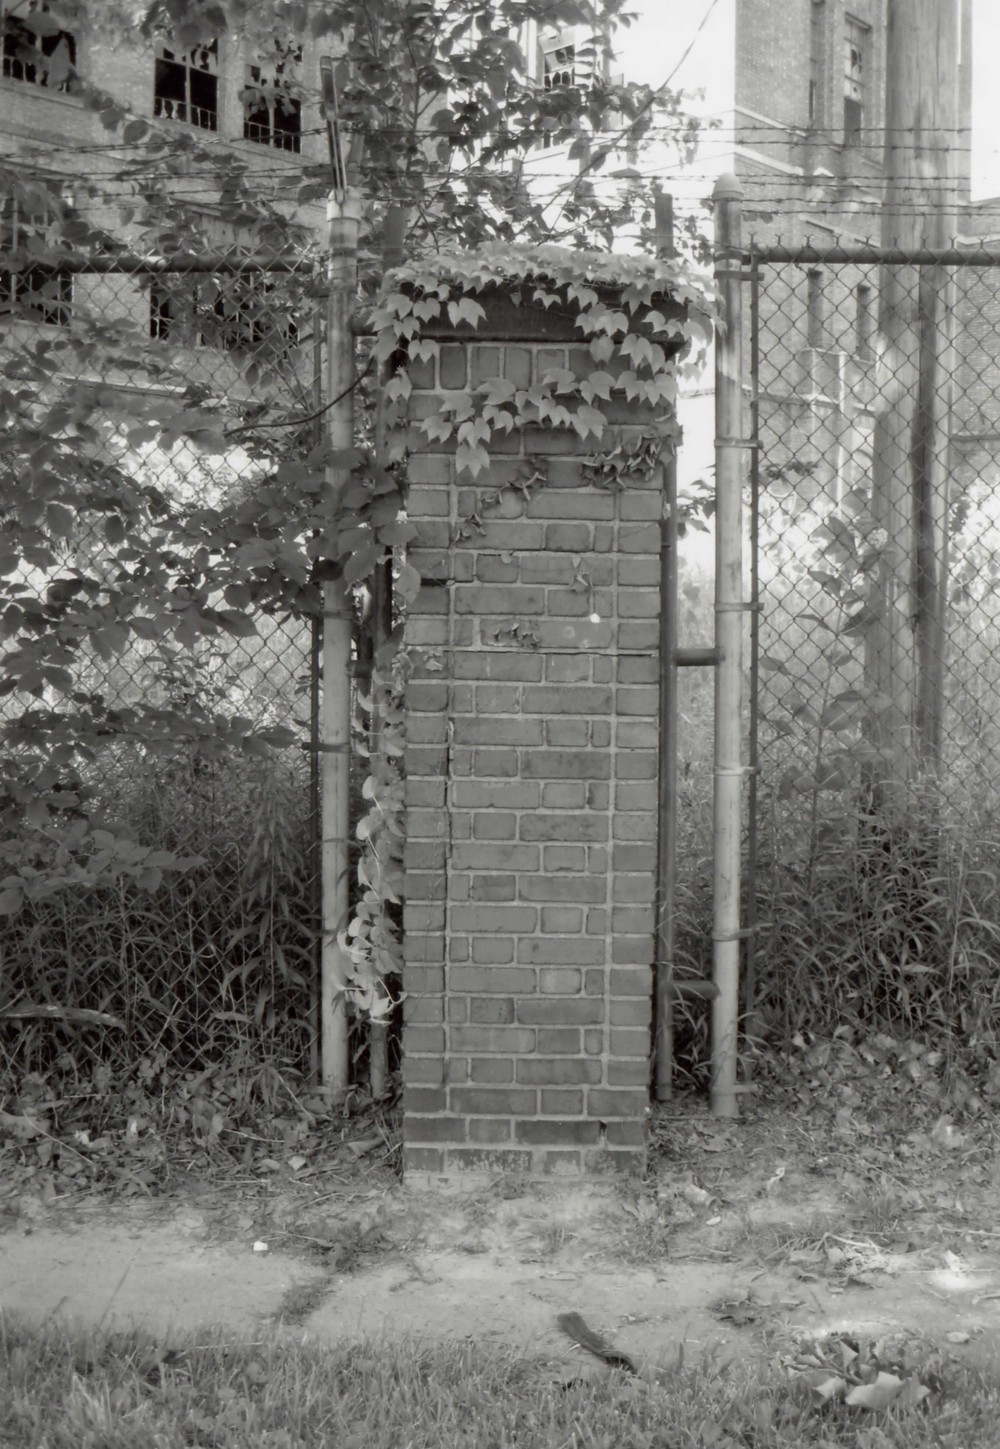 Joseph and Feiss Clothcraft Shops, Cleveland Ohio View of brick and sandstone fence pier (2009)